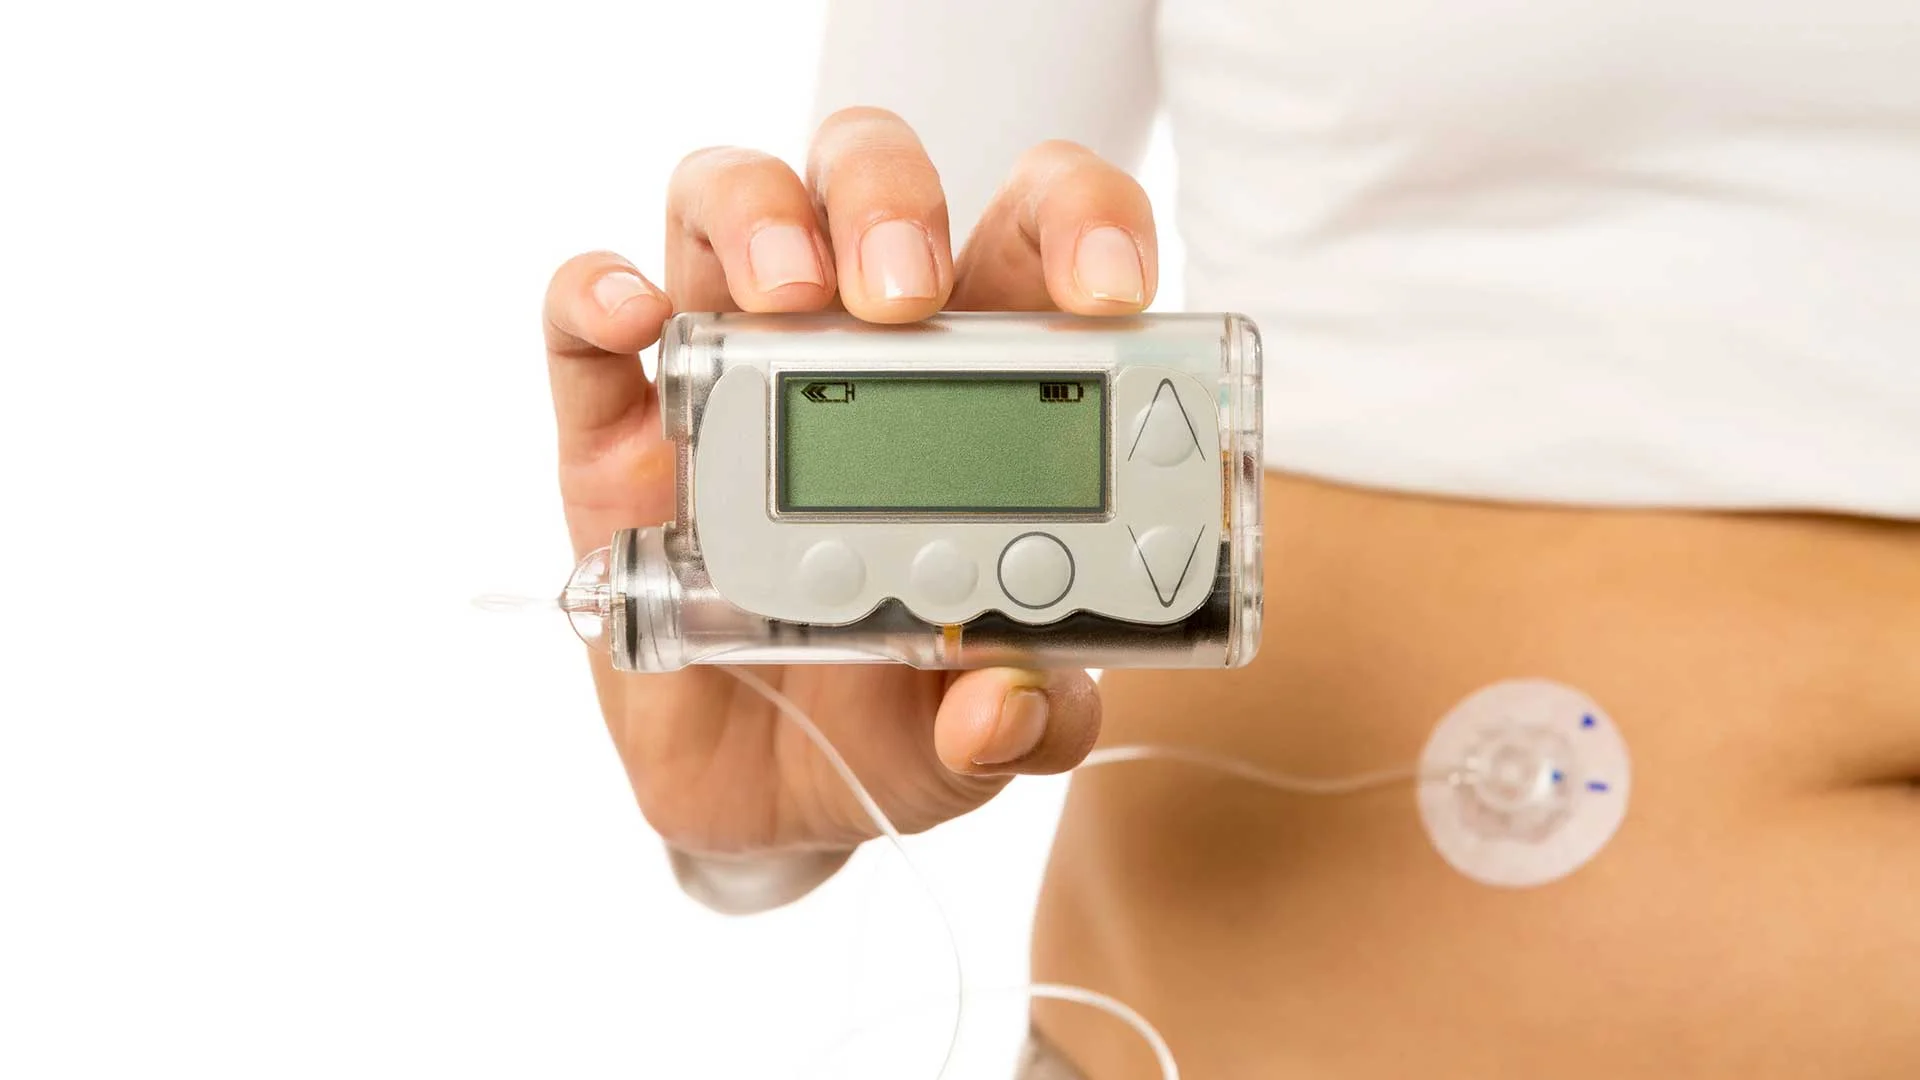 Insulin pumps require careful management to work safely and